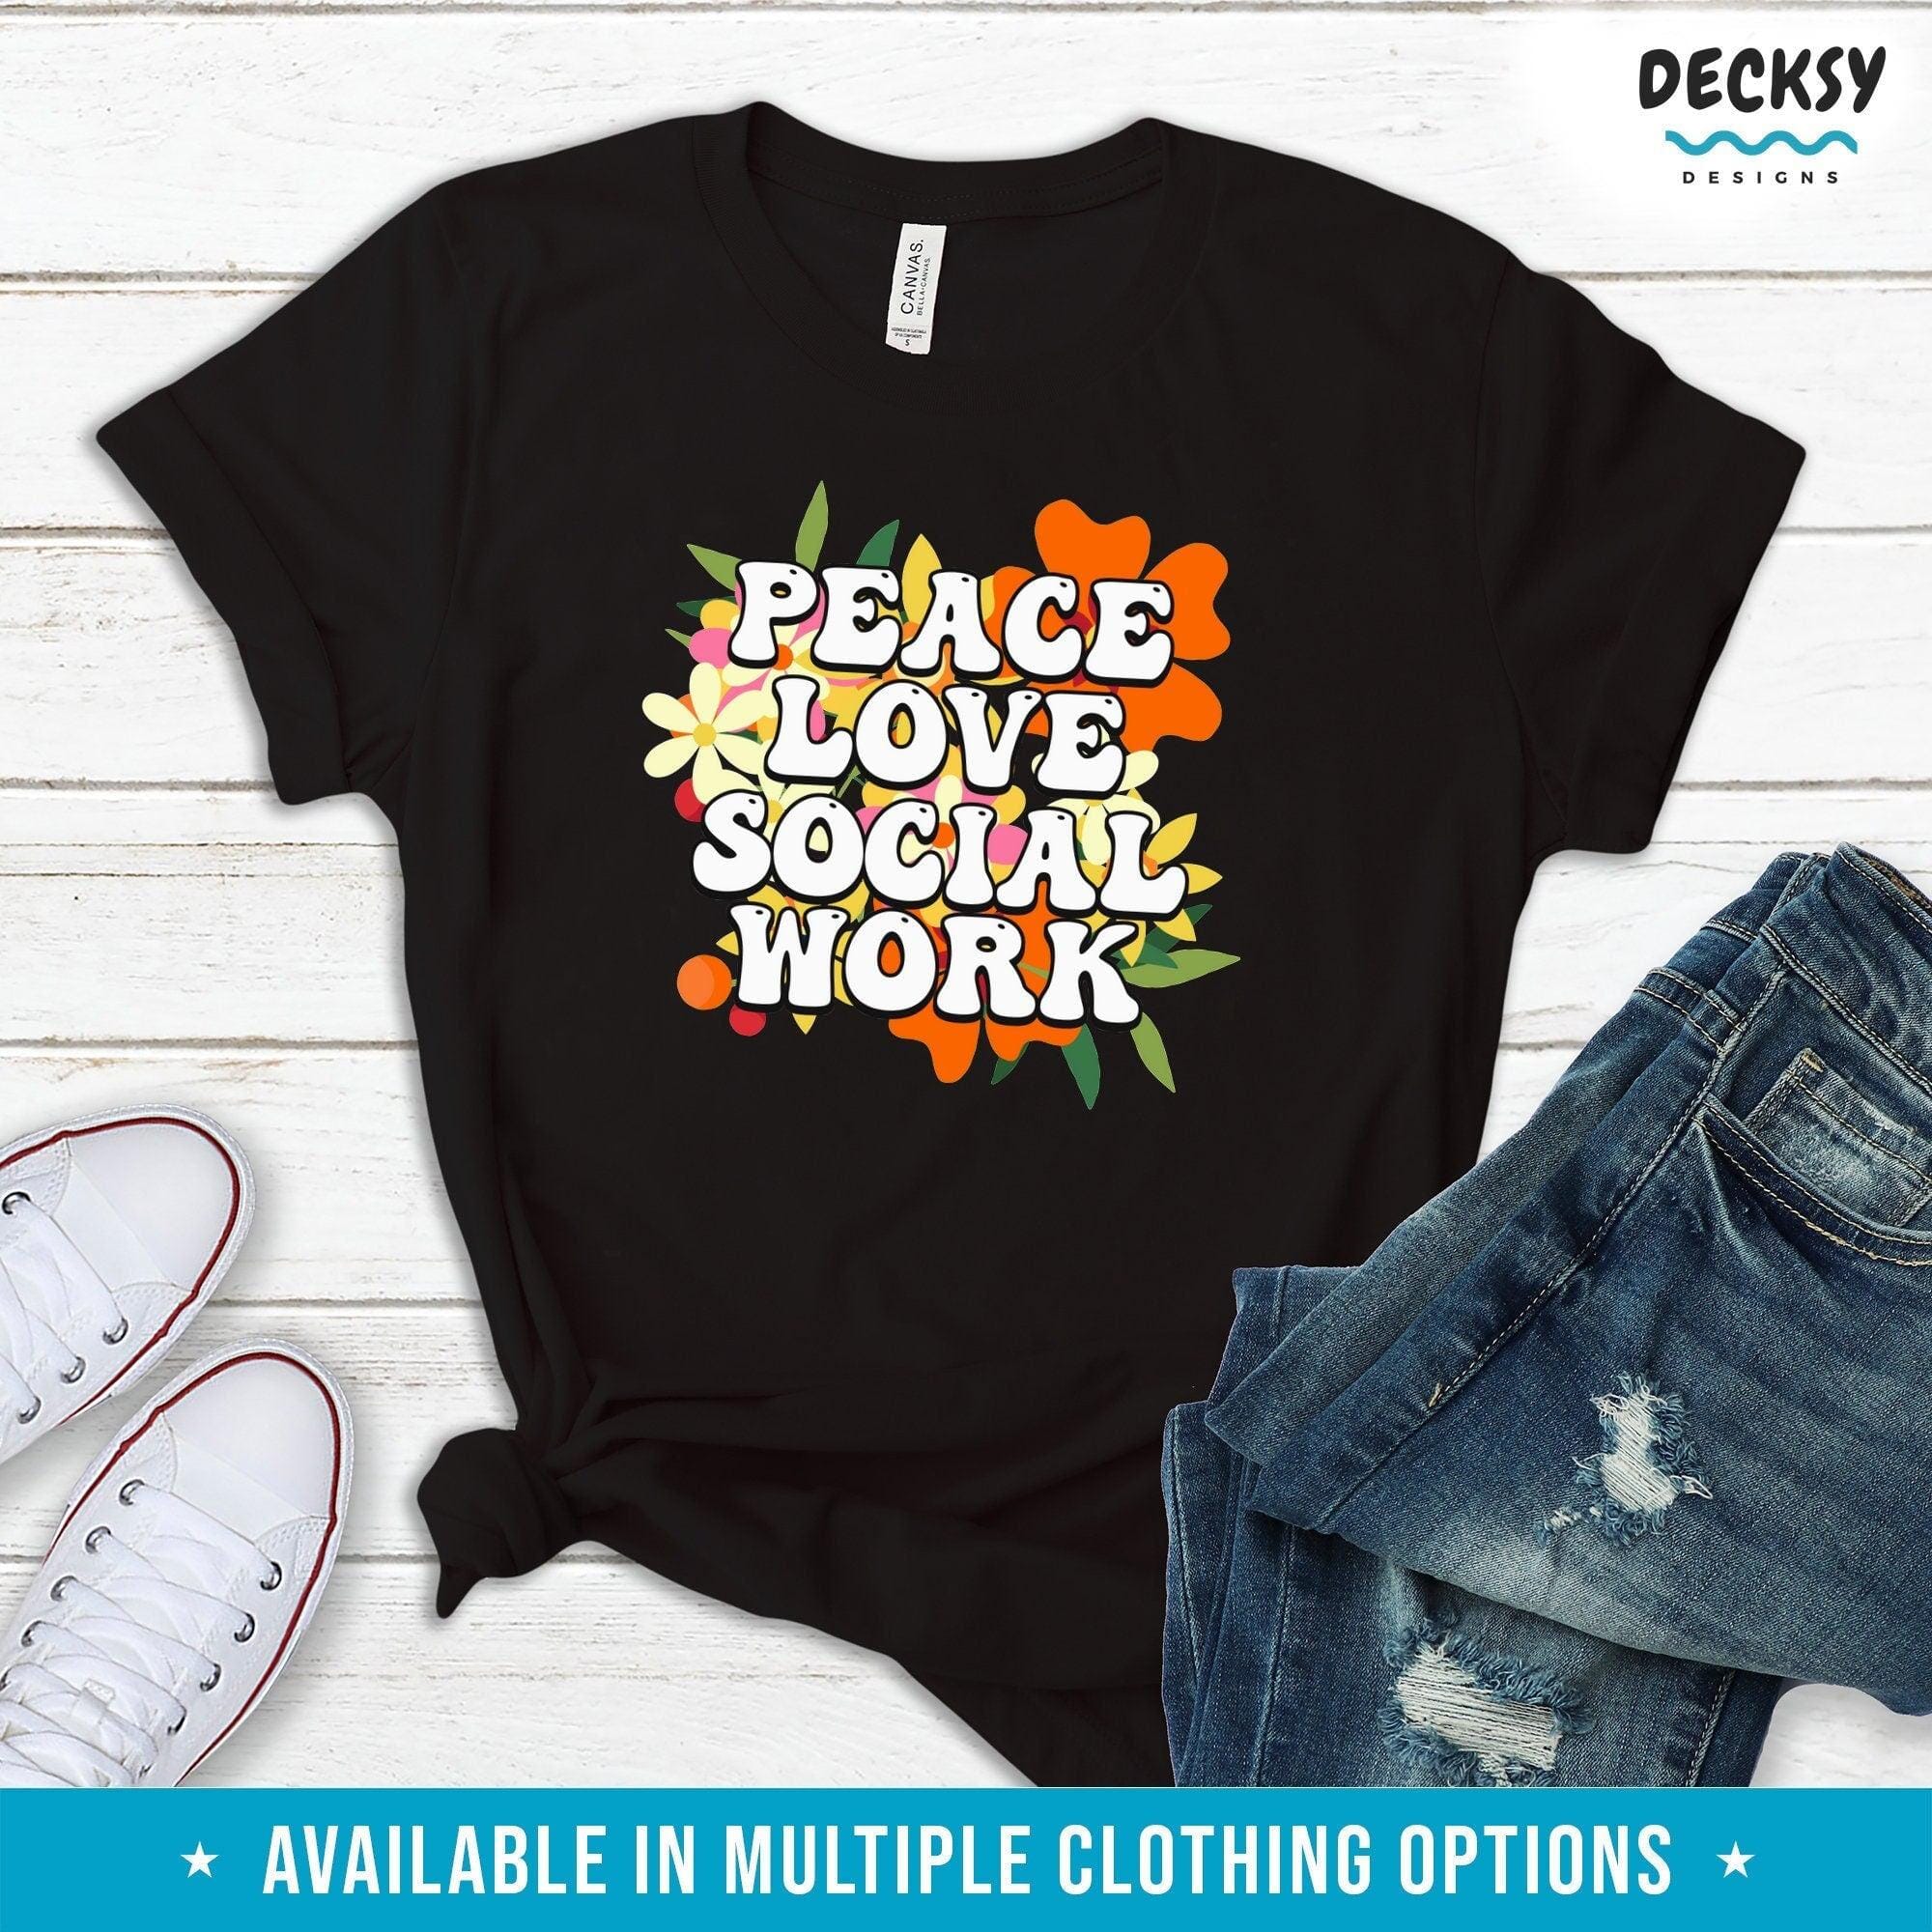 Social Worker Tshirt, Gift For Social Worker-Clothing:Gender-Neutral Adult Clothing:Tops & Tees:T-shirts:Graphic Tees-DecksyDesigns